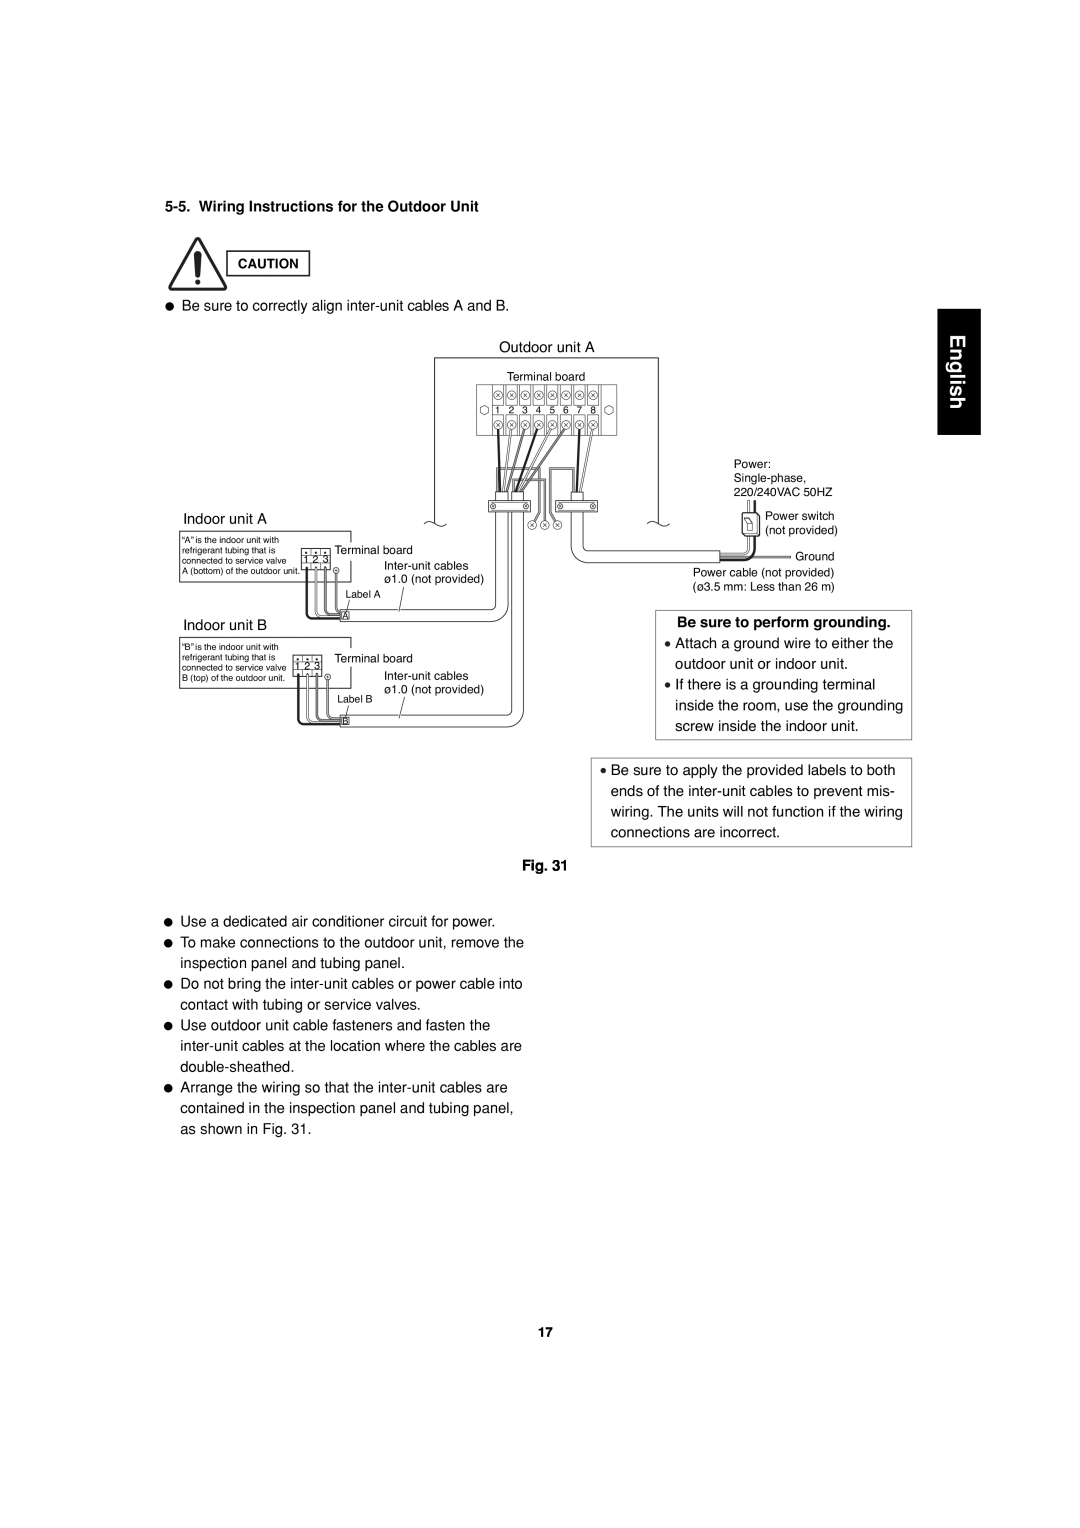 Sanyo SAP-CMRV1426EH-F service manual English, Wiring Instructions for the Outdoor Unit, Be sure to perform grounding, Fig 